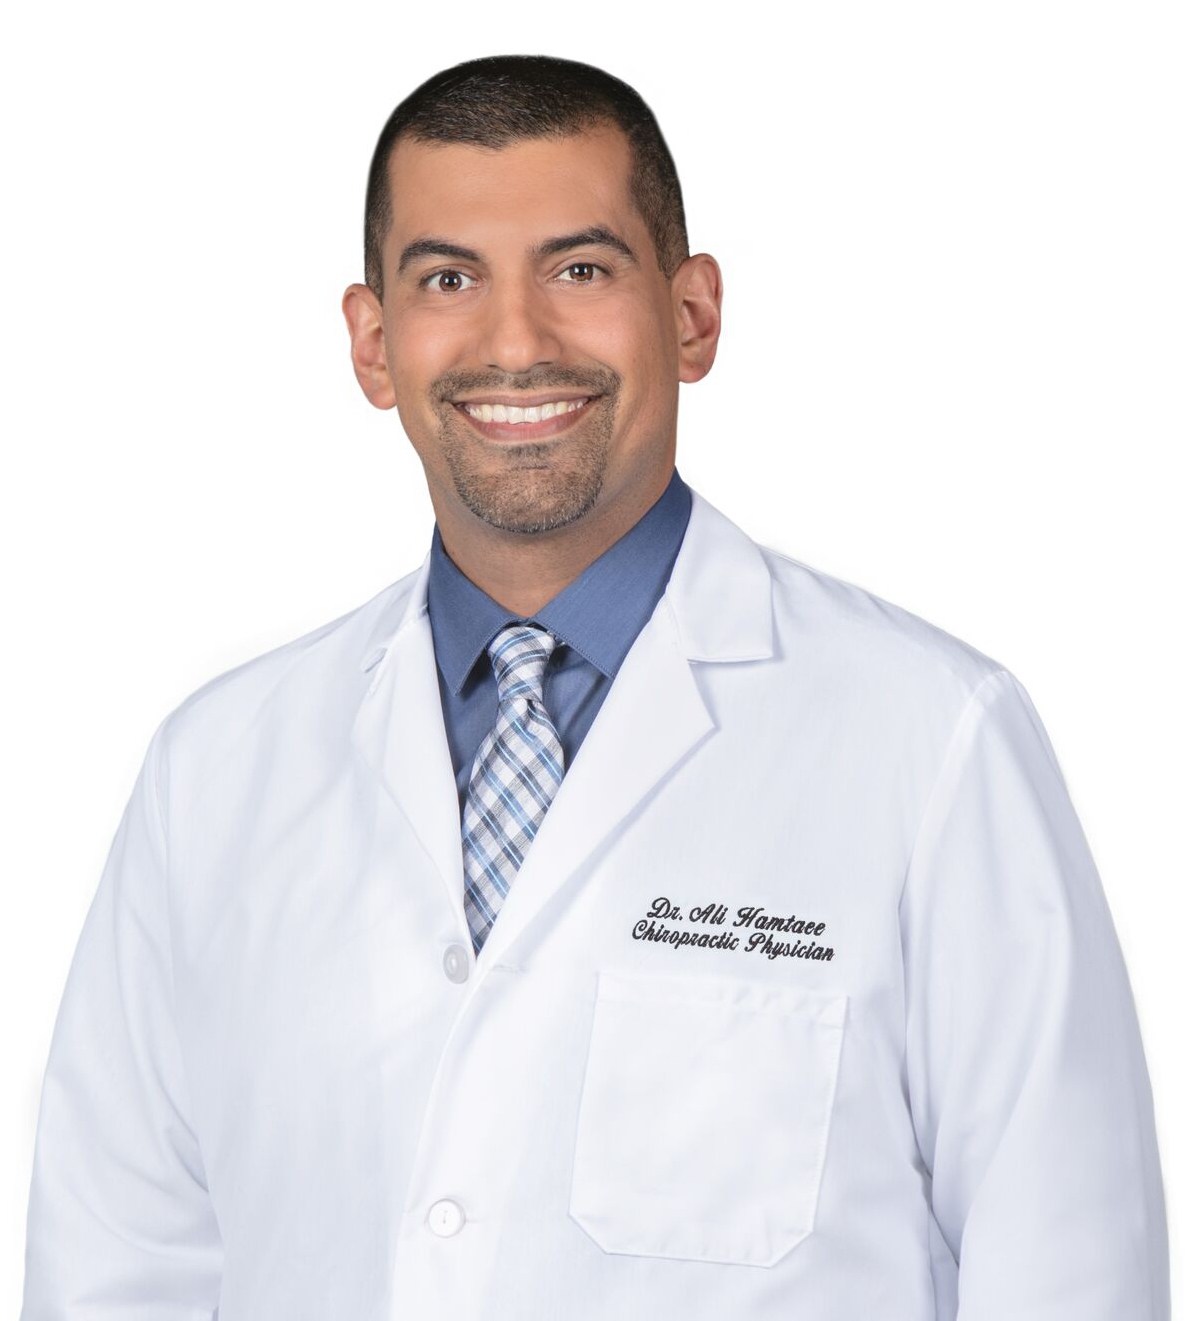 Our owner and founder, Dr. Ali Hamtaee